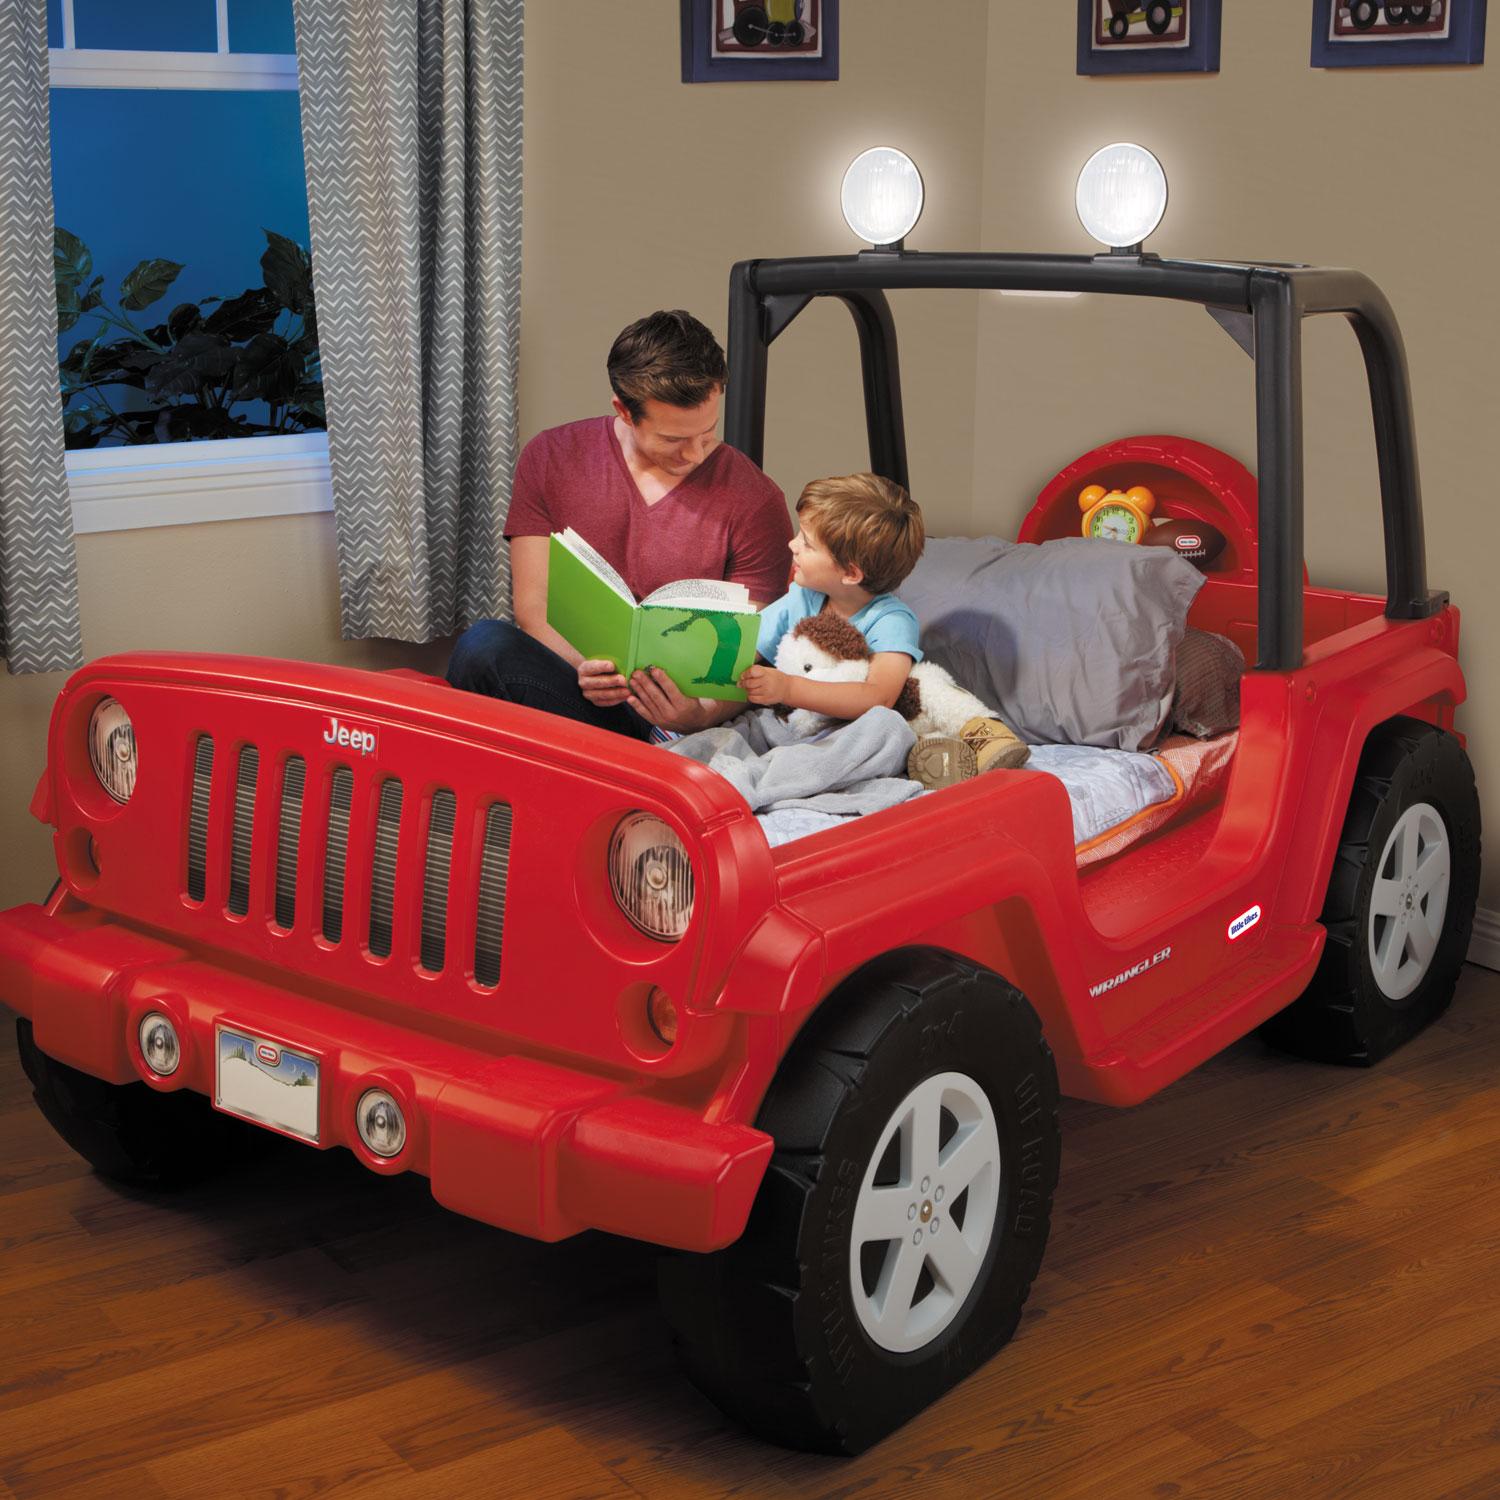 Jeep® Wrangler Toddler to Twin Bed 592688 – Aliss Puerto Rico